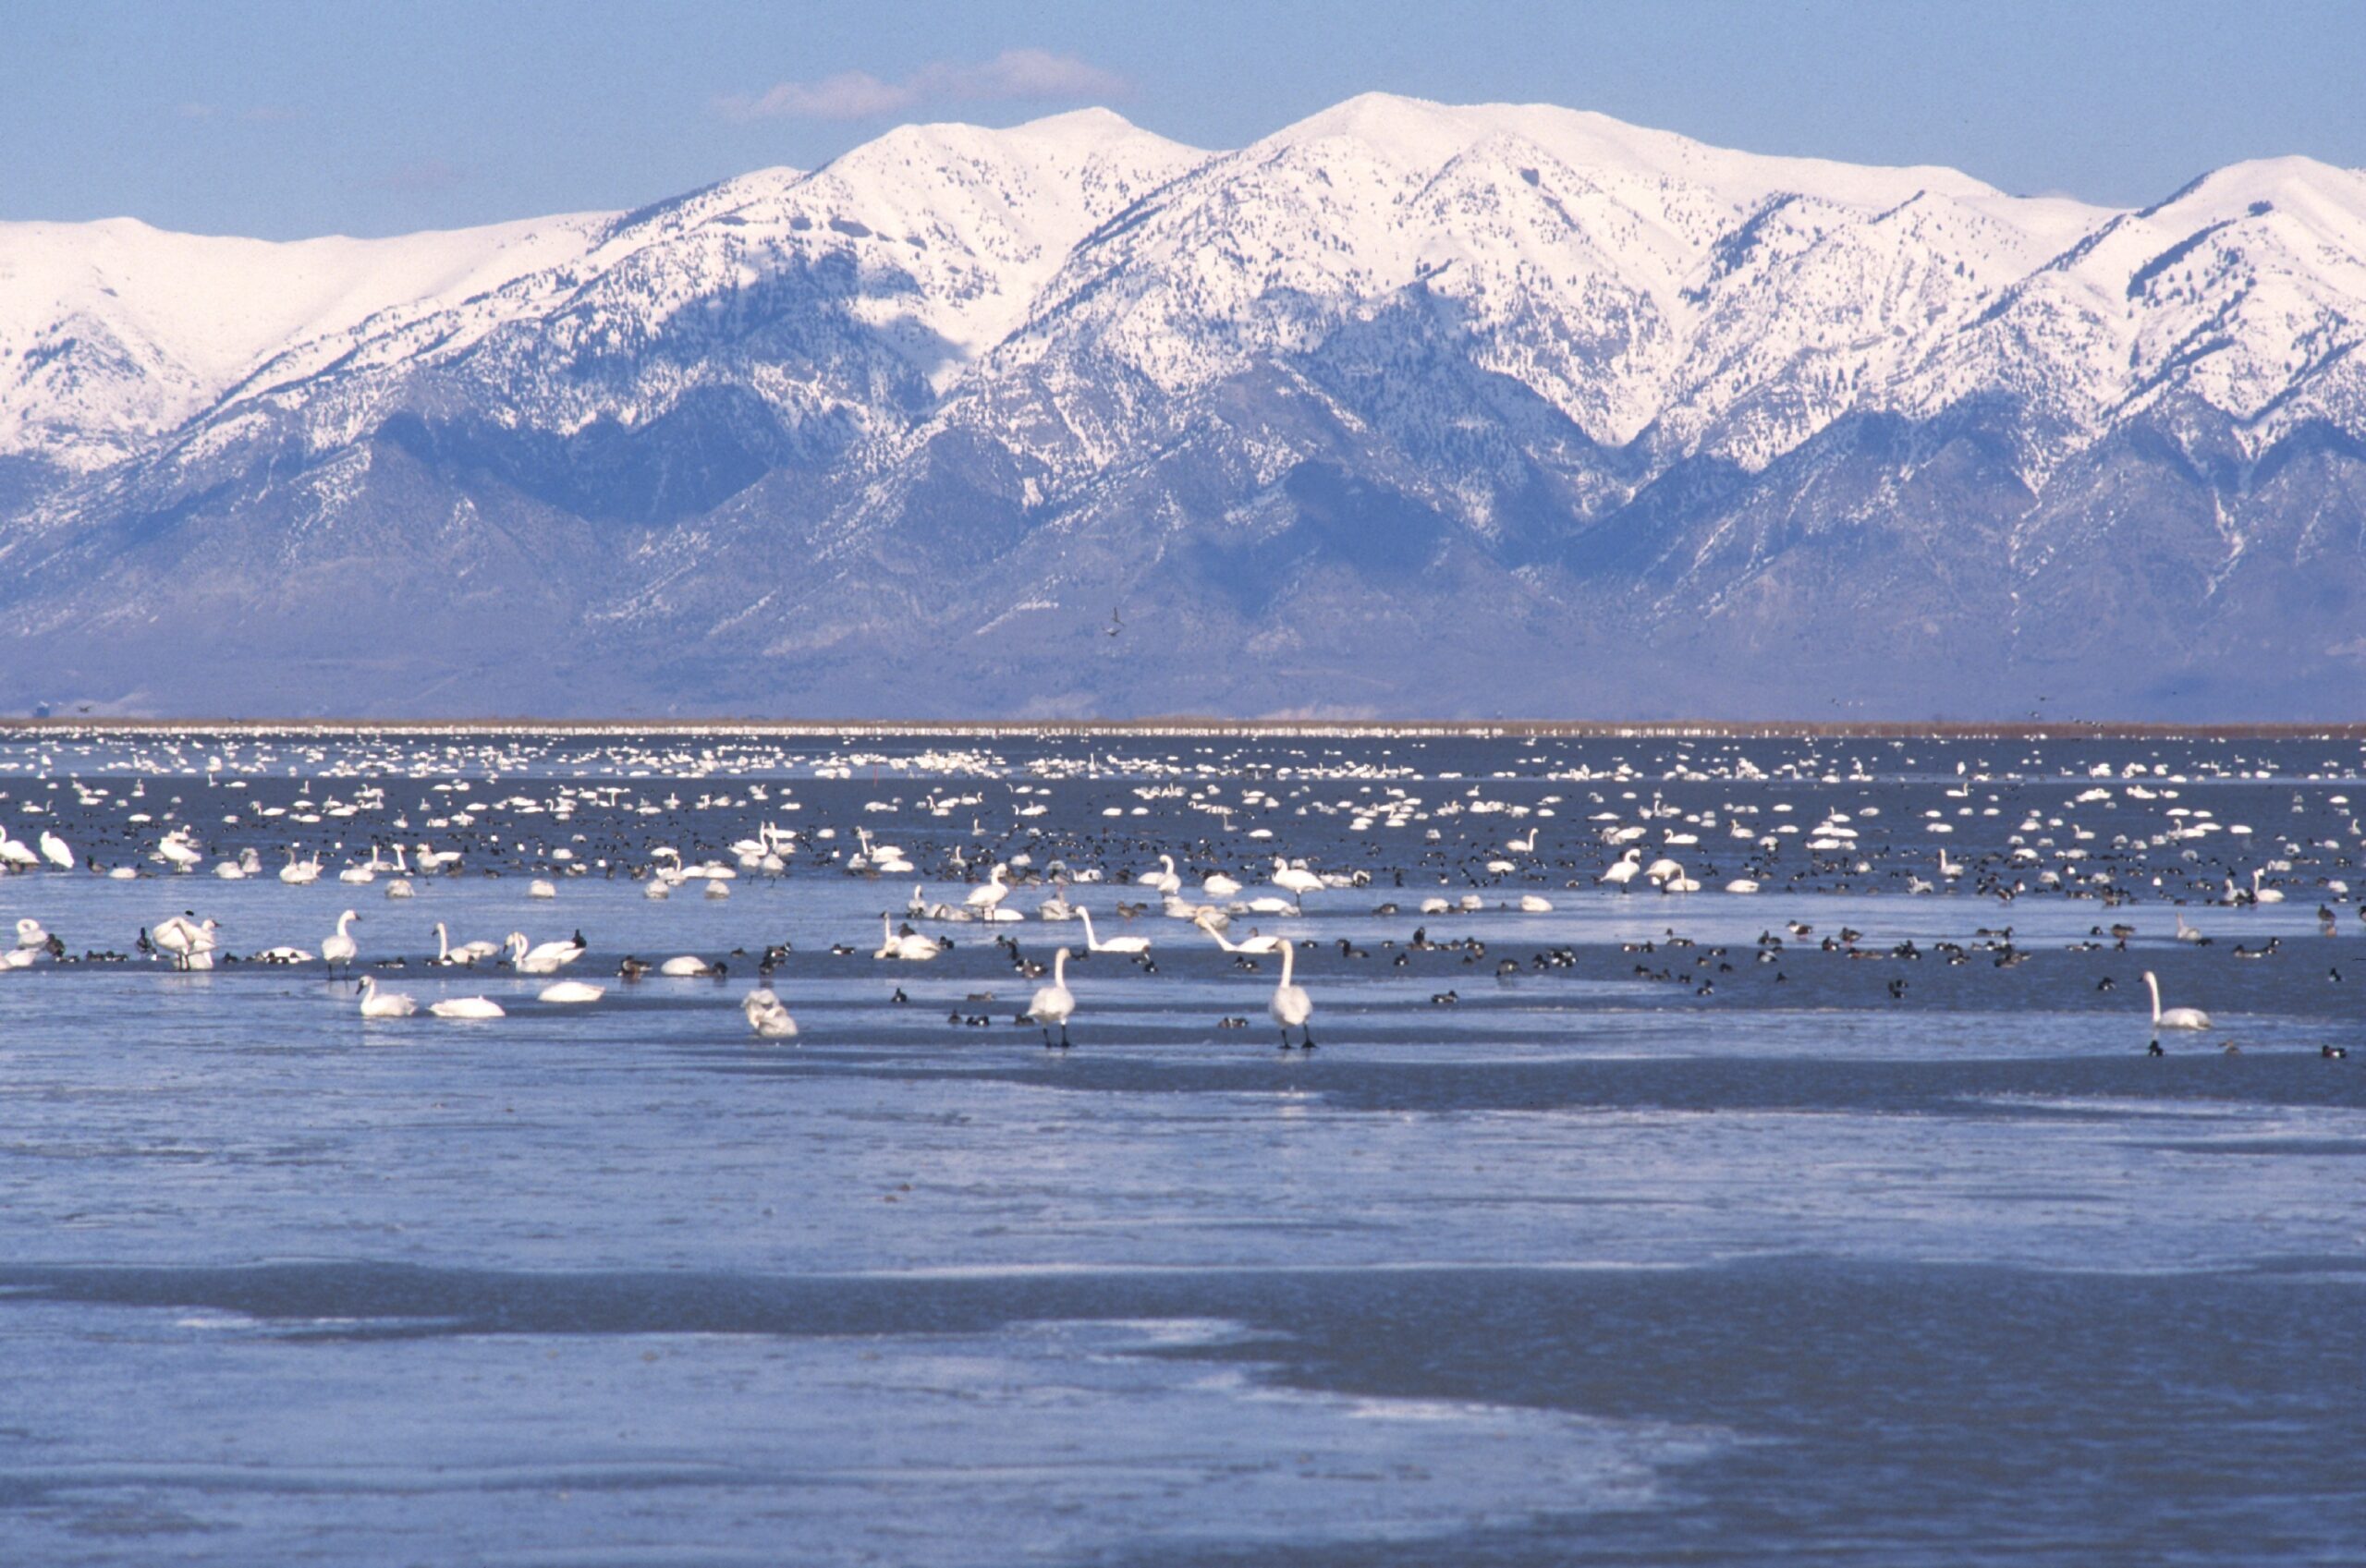 Waterfowl on the Great Salt Lake with the Wasatch Mountains in the background.